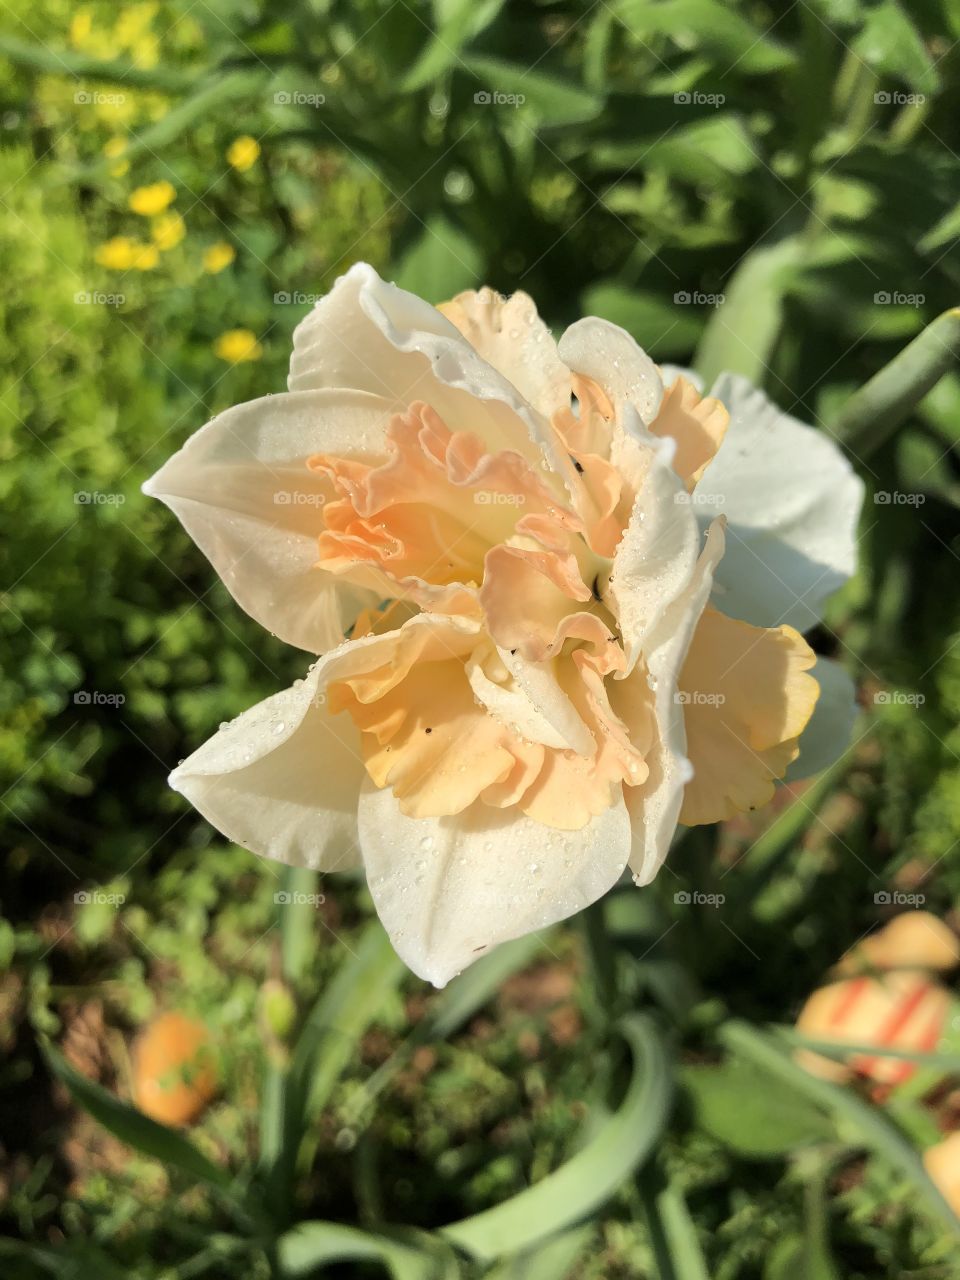 A double creamy white and peach colored double daffodils bloom in my garden.